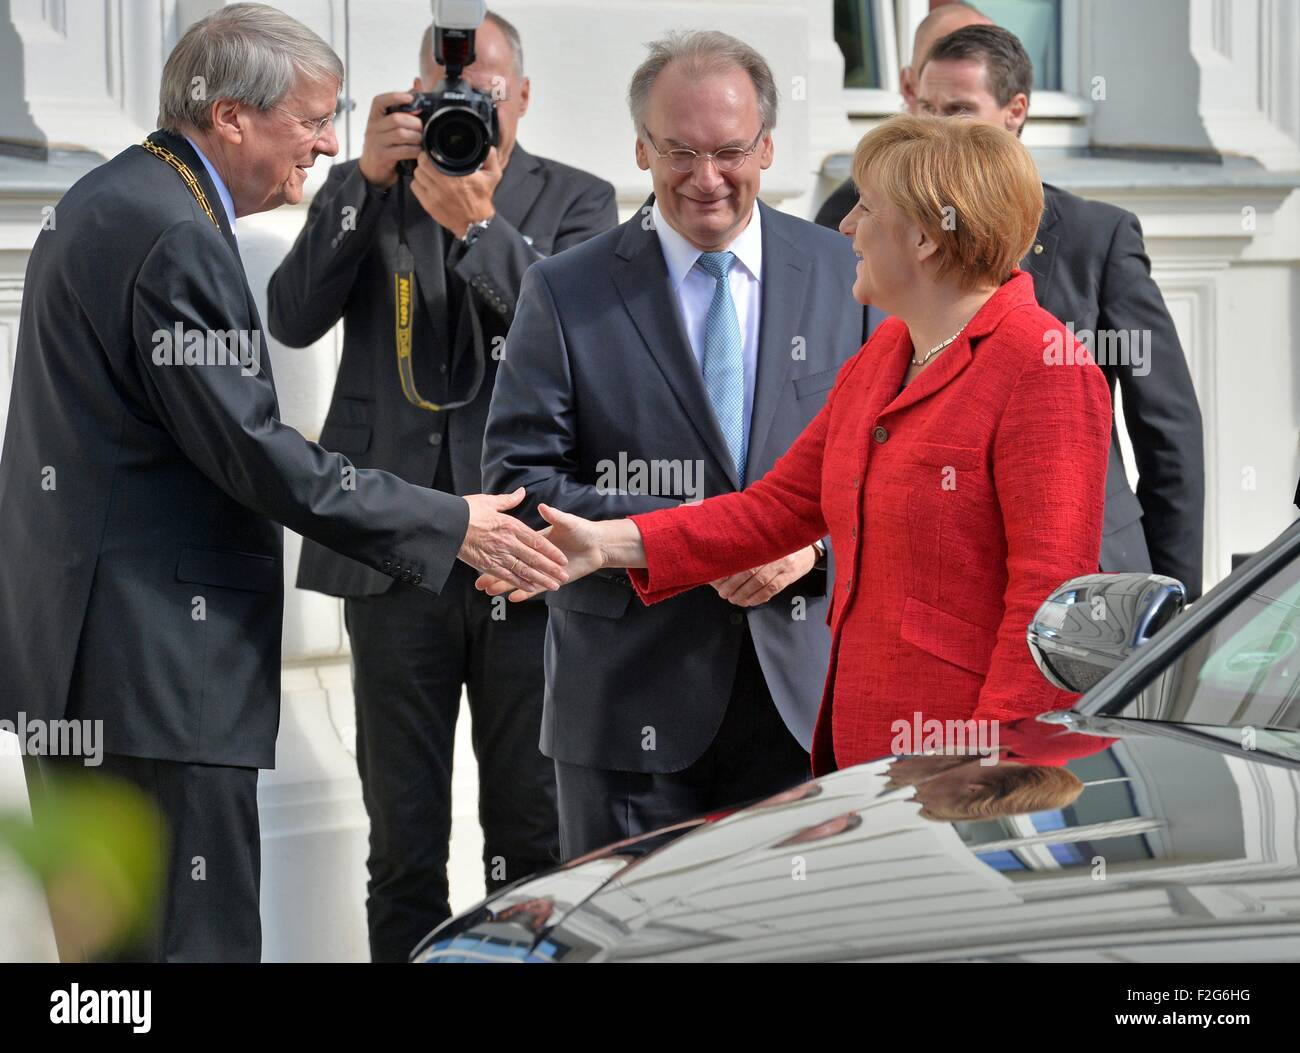 Halle, Germany. 18th Sep, 2015. The Premier of Saxony-Anhalt Reiner Haseloff (CDU, R) and the President of the Leopoldina German National Academy for Sciences, Joerg Hacker (L) greet German Chancellor (CDU) Angela Merkel at the beginning of the acadamy's annual meeting in Halle, Germany, 18 September 2015. The event this year is being held under the title 'Symmetry and asymmetry in science and art' Photo: HENDRIK SCHMIDT/DPA/Alamy Live News Stock Photo